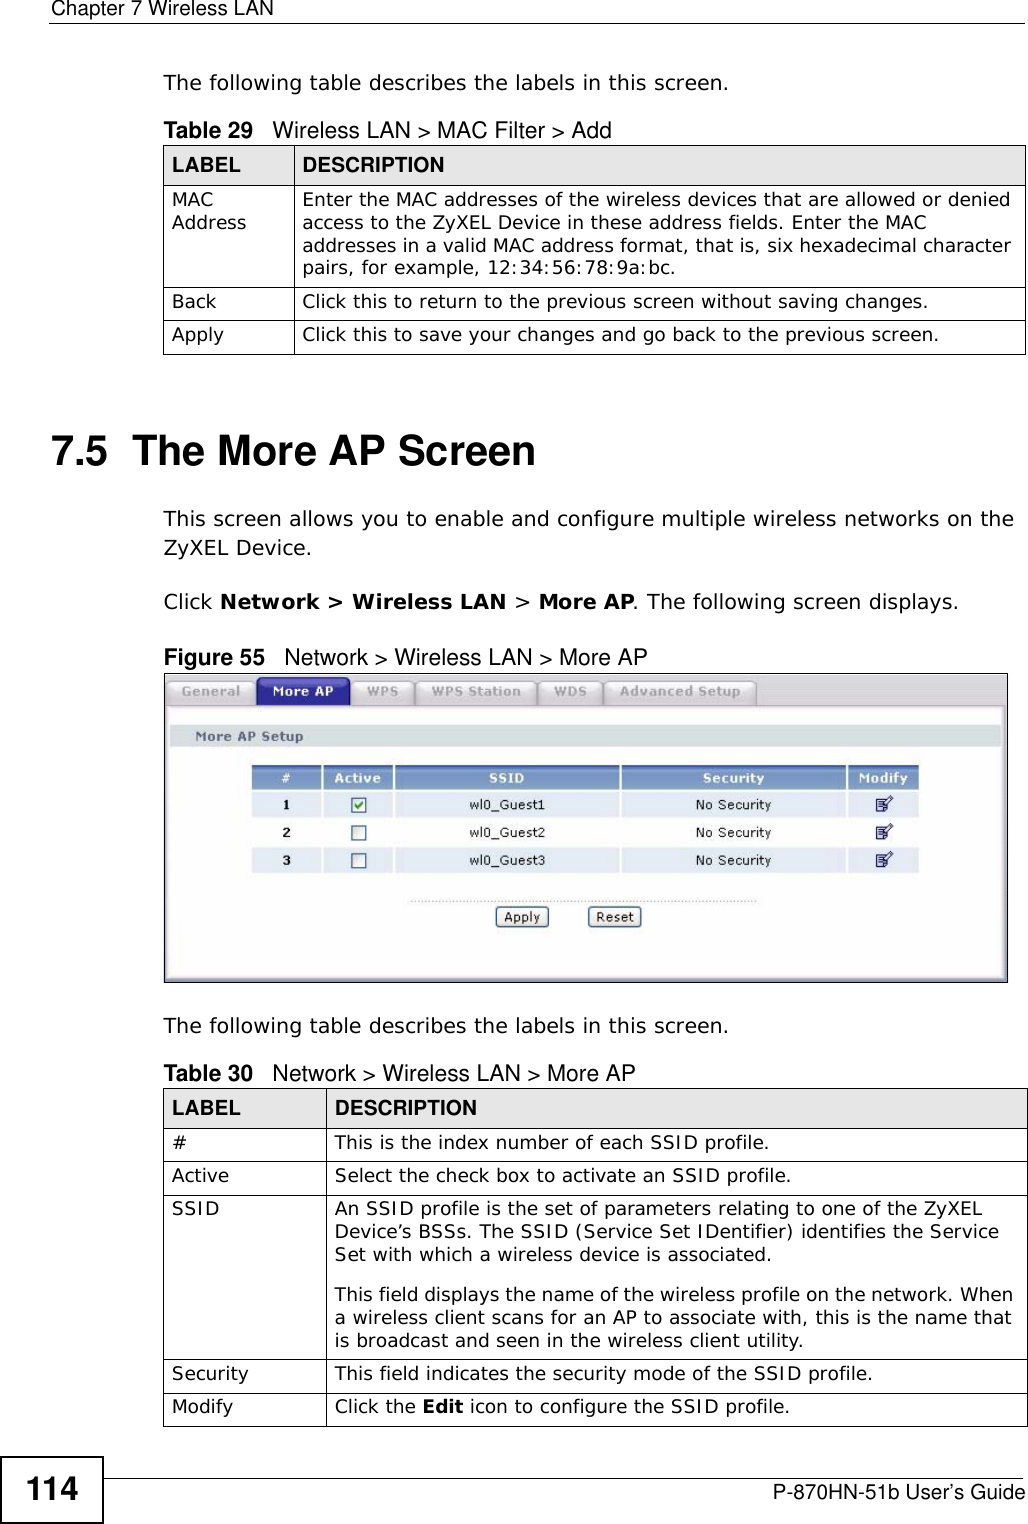 Chapter 7 Wireless LANP-870HN-51b User’s Guide114The following table describes the labels in this screen.7.5  The More AP Screen This screen allows you to enable and configure multiple wireless networks on the ZyXEL Device.Click Network &gt; Wireless LAN &gt; More AP. The following screen displays.Figure 55   Network &gt; Wireless LAN &gt; More APThe following table describes the labels in this screen.Table 29   Wireless LAN &gt; MAC Filter &gt; AddLABEL DESCRIPTIONMAC Address Enter the MAC addresses of the wireless devices that are allowed or denied access to the ZyXEL Device in these address fields. Enter the MAC addresses in a valid MAC address format, that is, six hexadecimal character pairs, for example, 12:34:56:78:9a:bc.Back Click this to return to the previous screen without saving changes.Apply Click this to save your changes and go back to the previous screen.Table 30   Network &gt; Wireless LAN &gt; More APLABEL DESCRIPTION# This is the index number of each SSID profile. Active Select the check box to activate an SSID profile.SSID An SSID profile is the set of parameters relating to one of the ZyXEL Device’s BSSs. The SSID (Service Set IDentifier) identifies the Service Set with which a wireless device is associated. This field displays the name of the wireless profile on the network. When a wireless client scans for an AP to associate with, this is the name that is broadcast and seen in the wireless client utility.Security This field indicates the security mode of the SSID profile.Modify Click the Edit icon to configure the SSID profile.